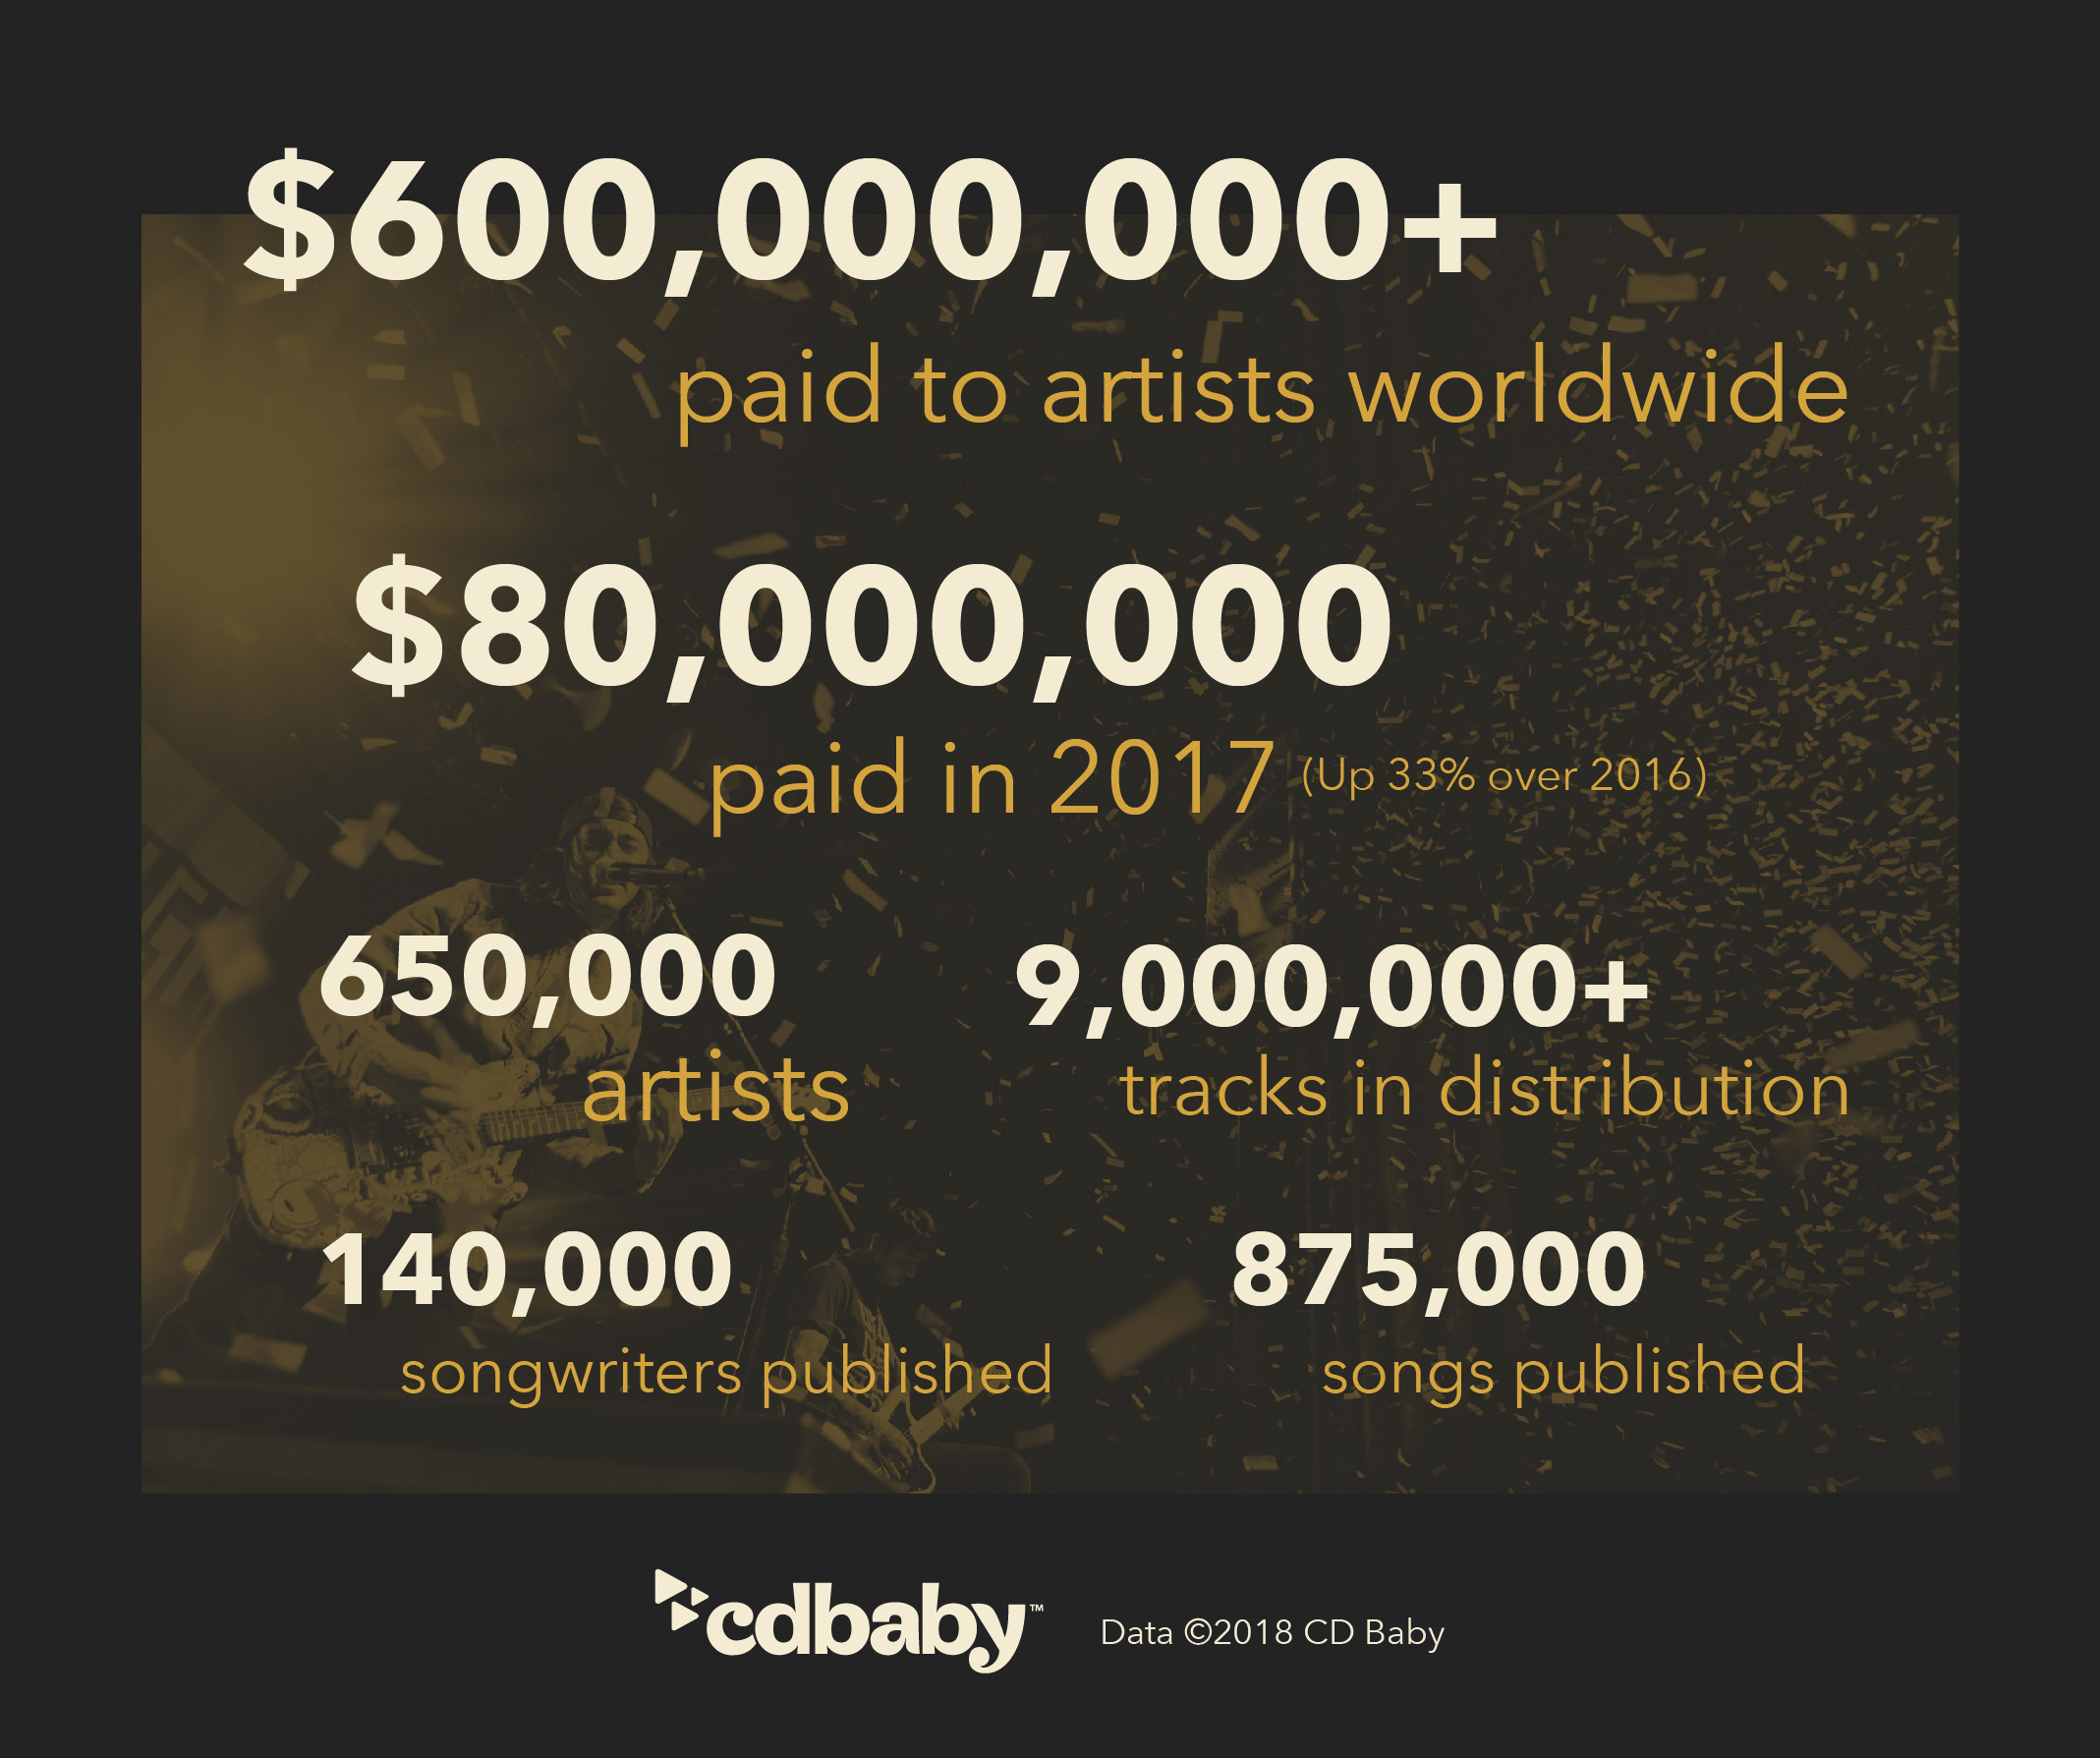 20 years of CD Baby distribution